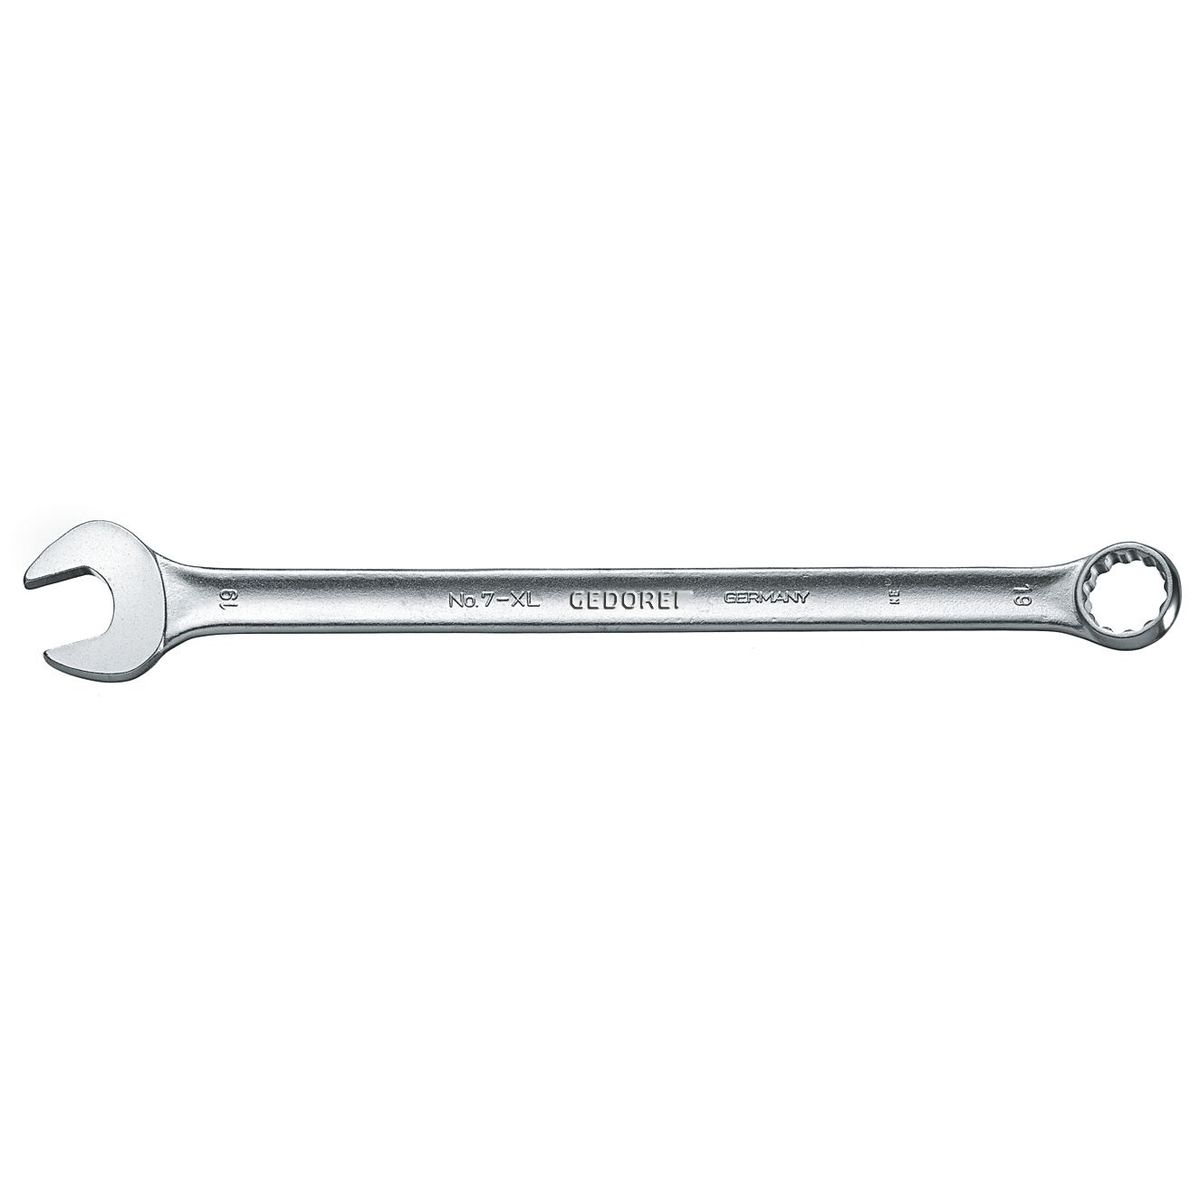 Combination spanner, extra long 24mm No.7 XL 24 Gedore